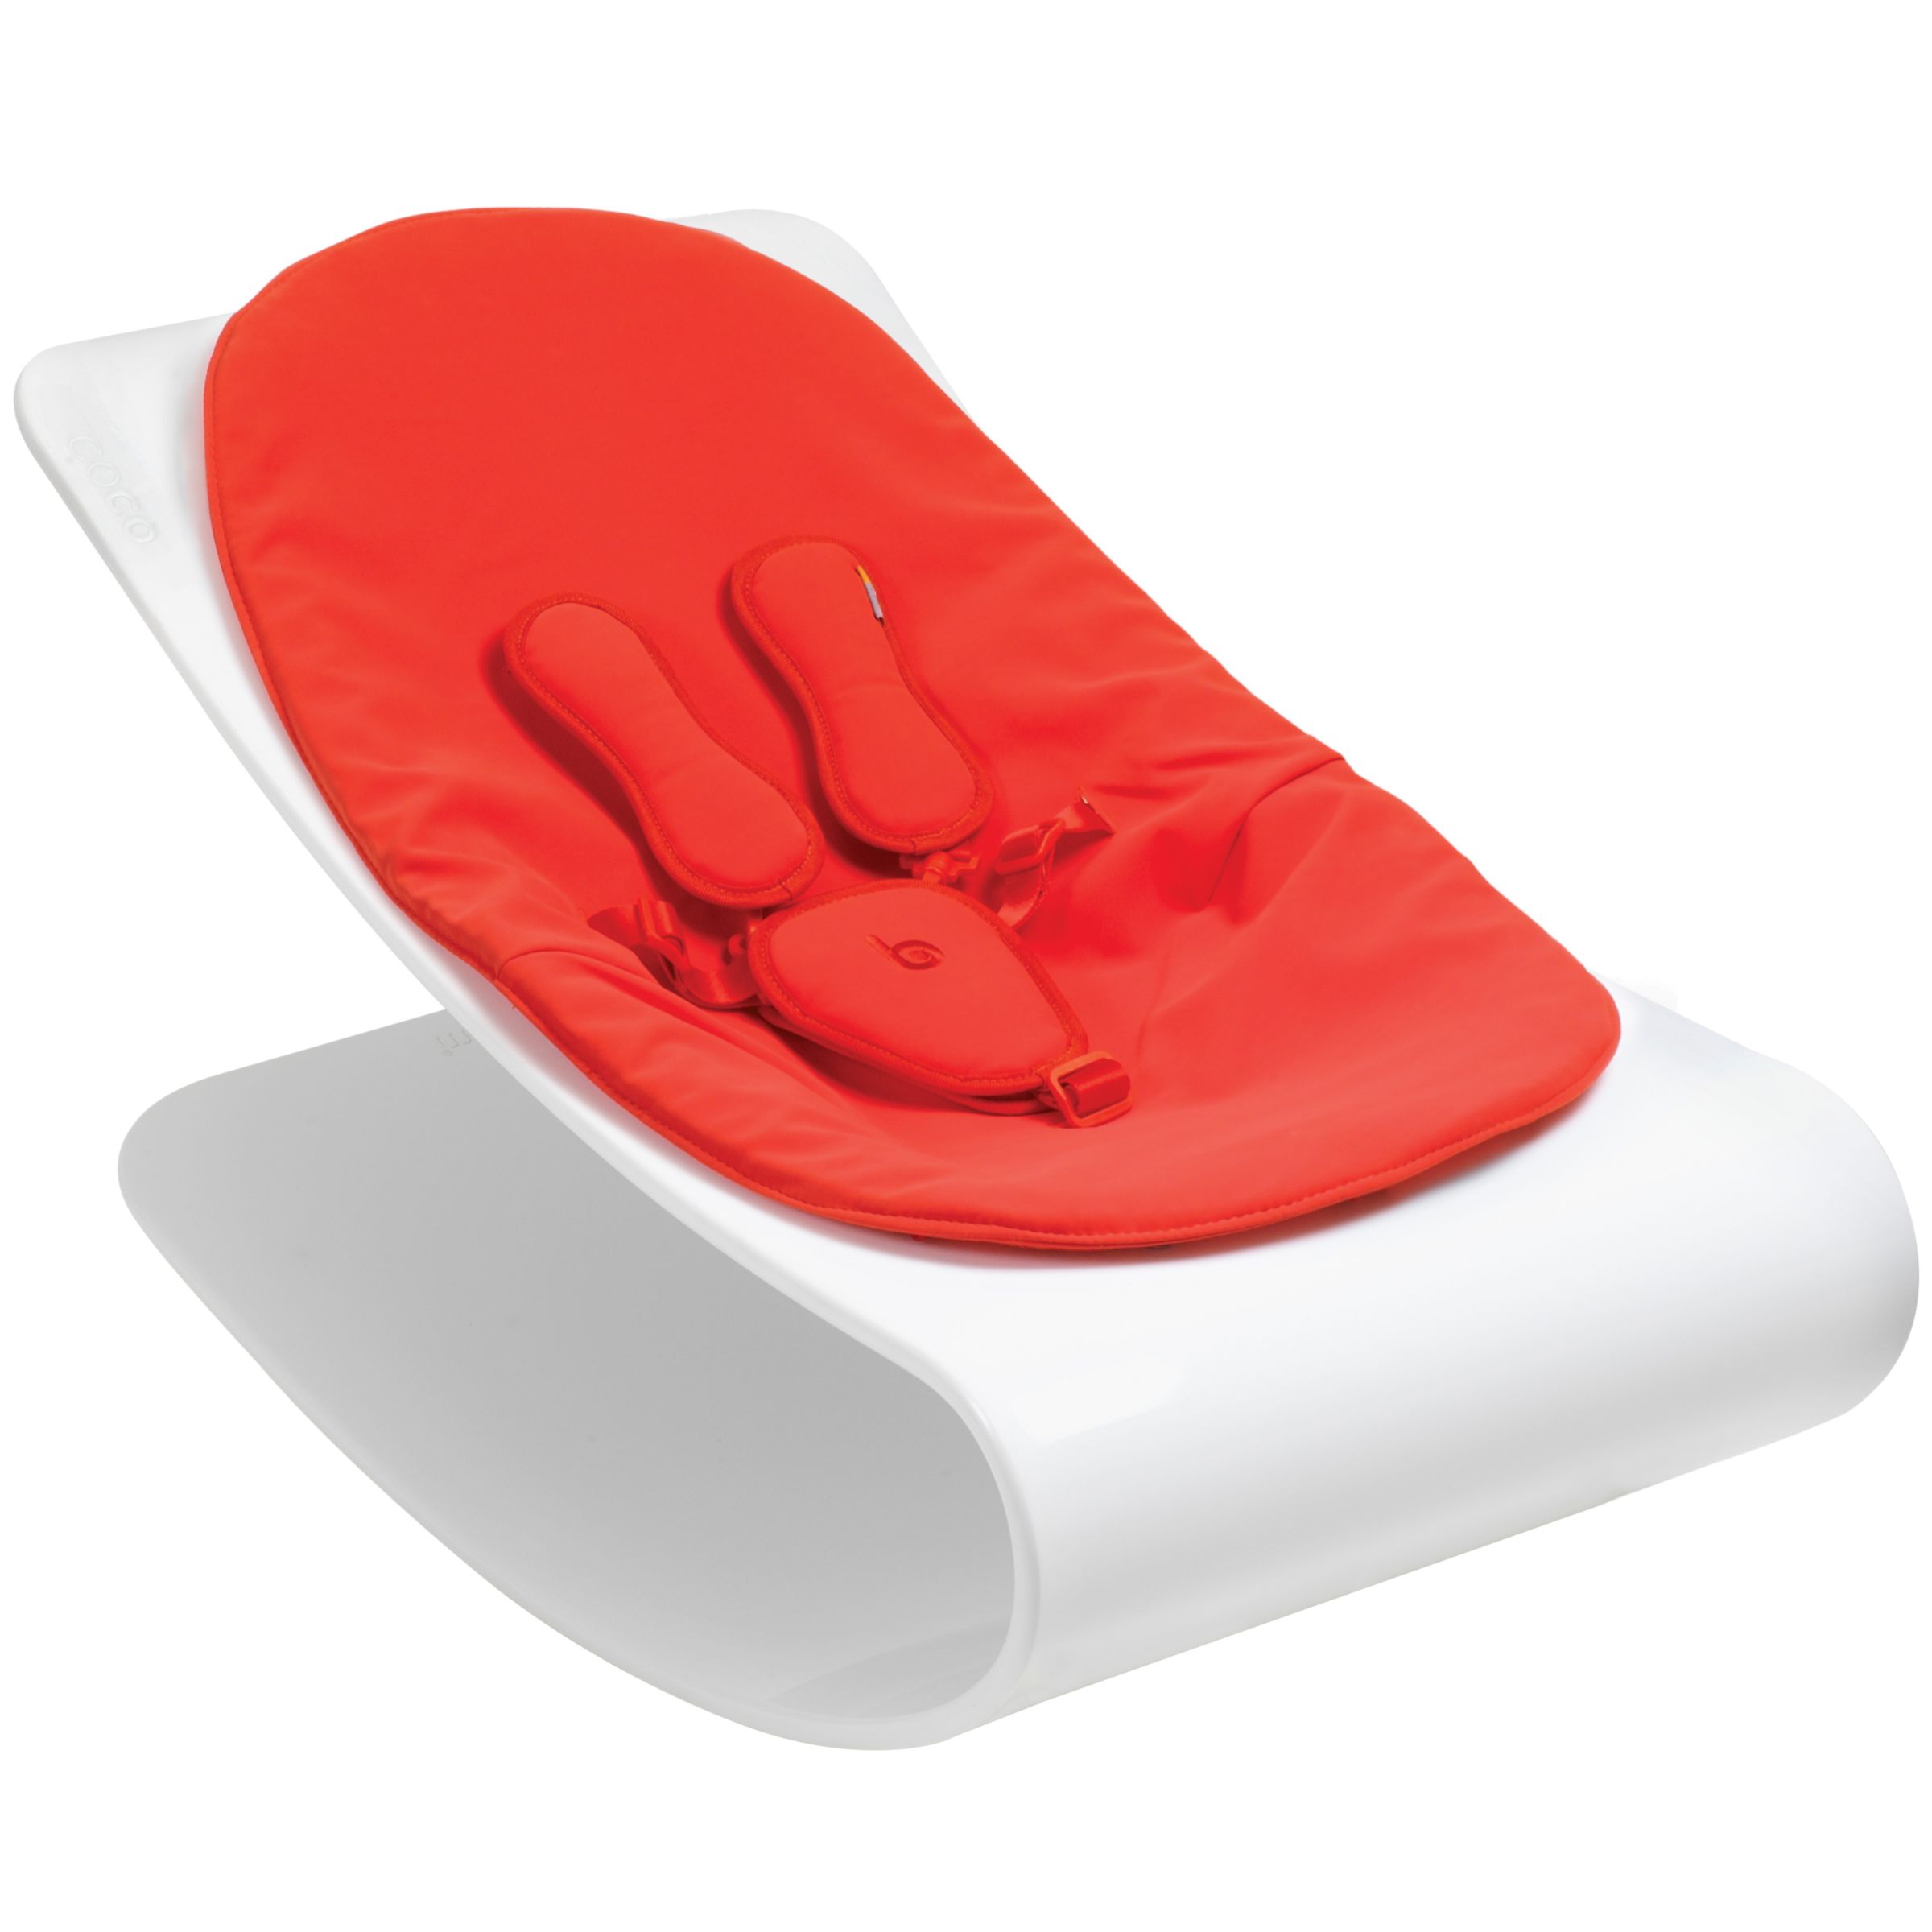 bloom Coco Plexistyle Baby Lounger, Ivory White with Rock Red at John Lewis